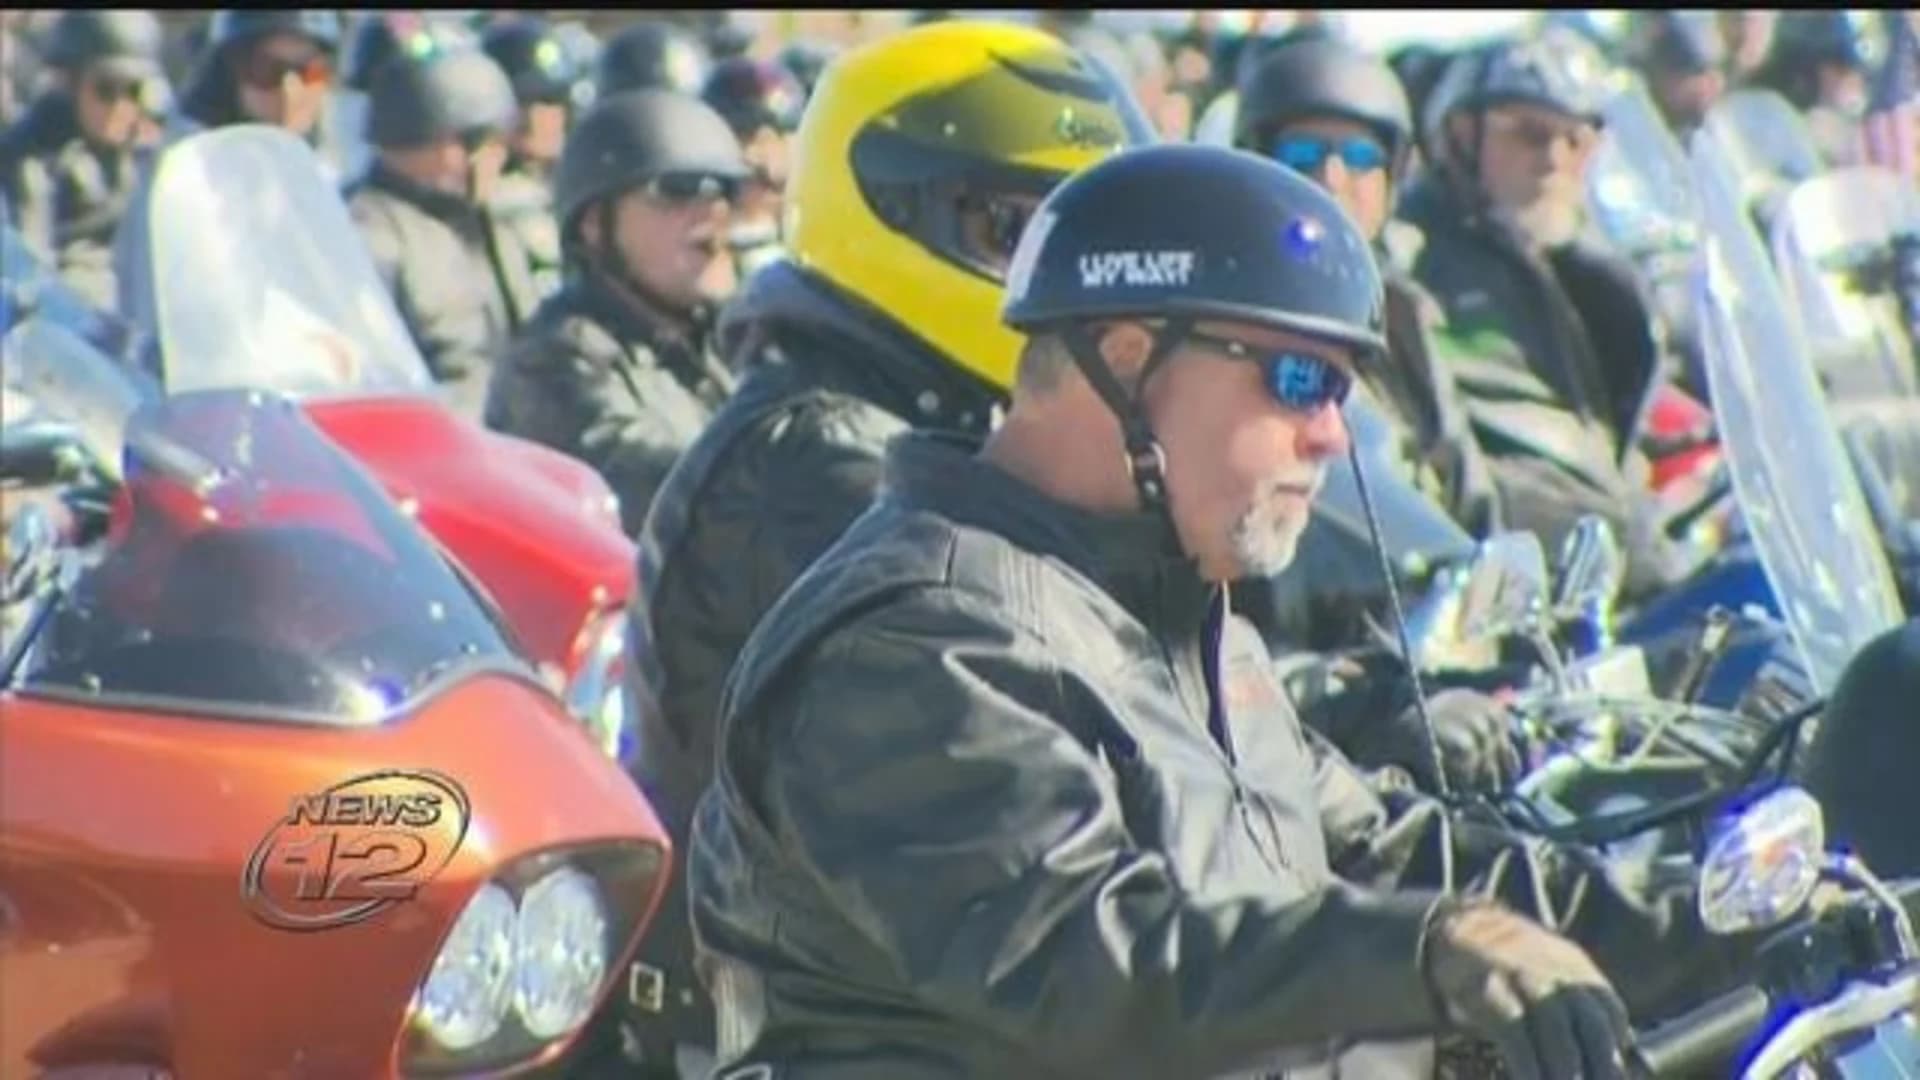 Dee Snider leads bikers on annual ride for great cause